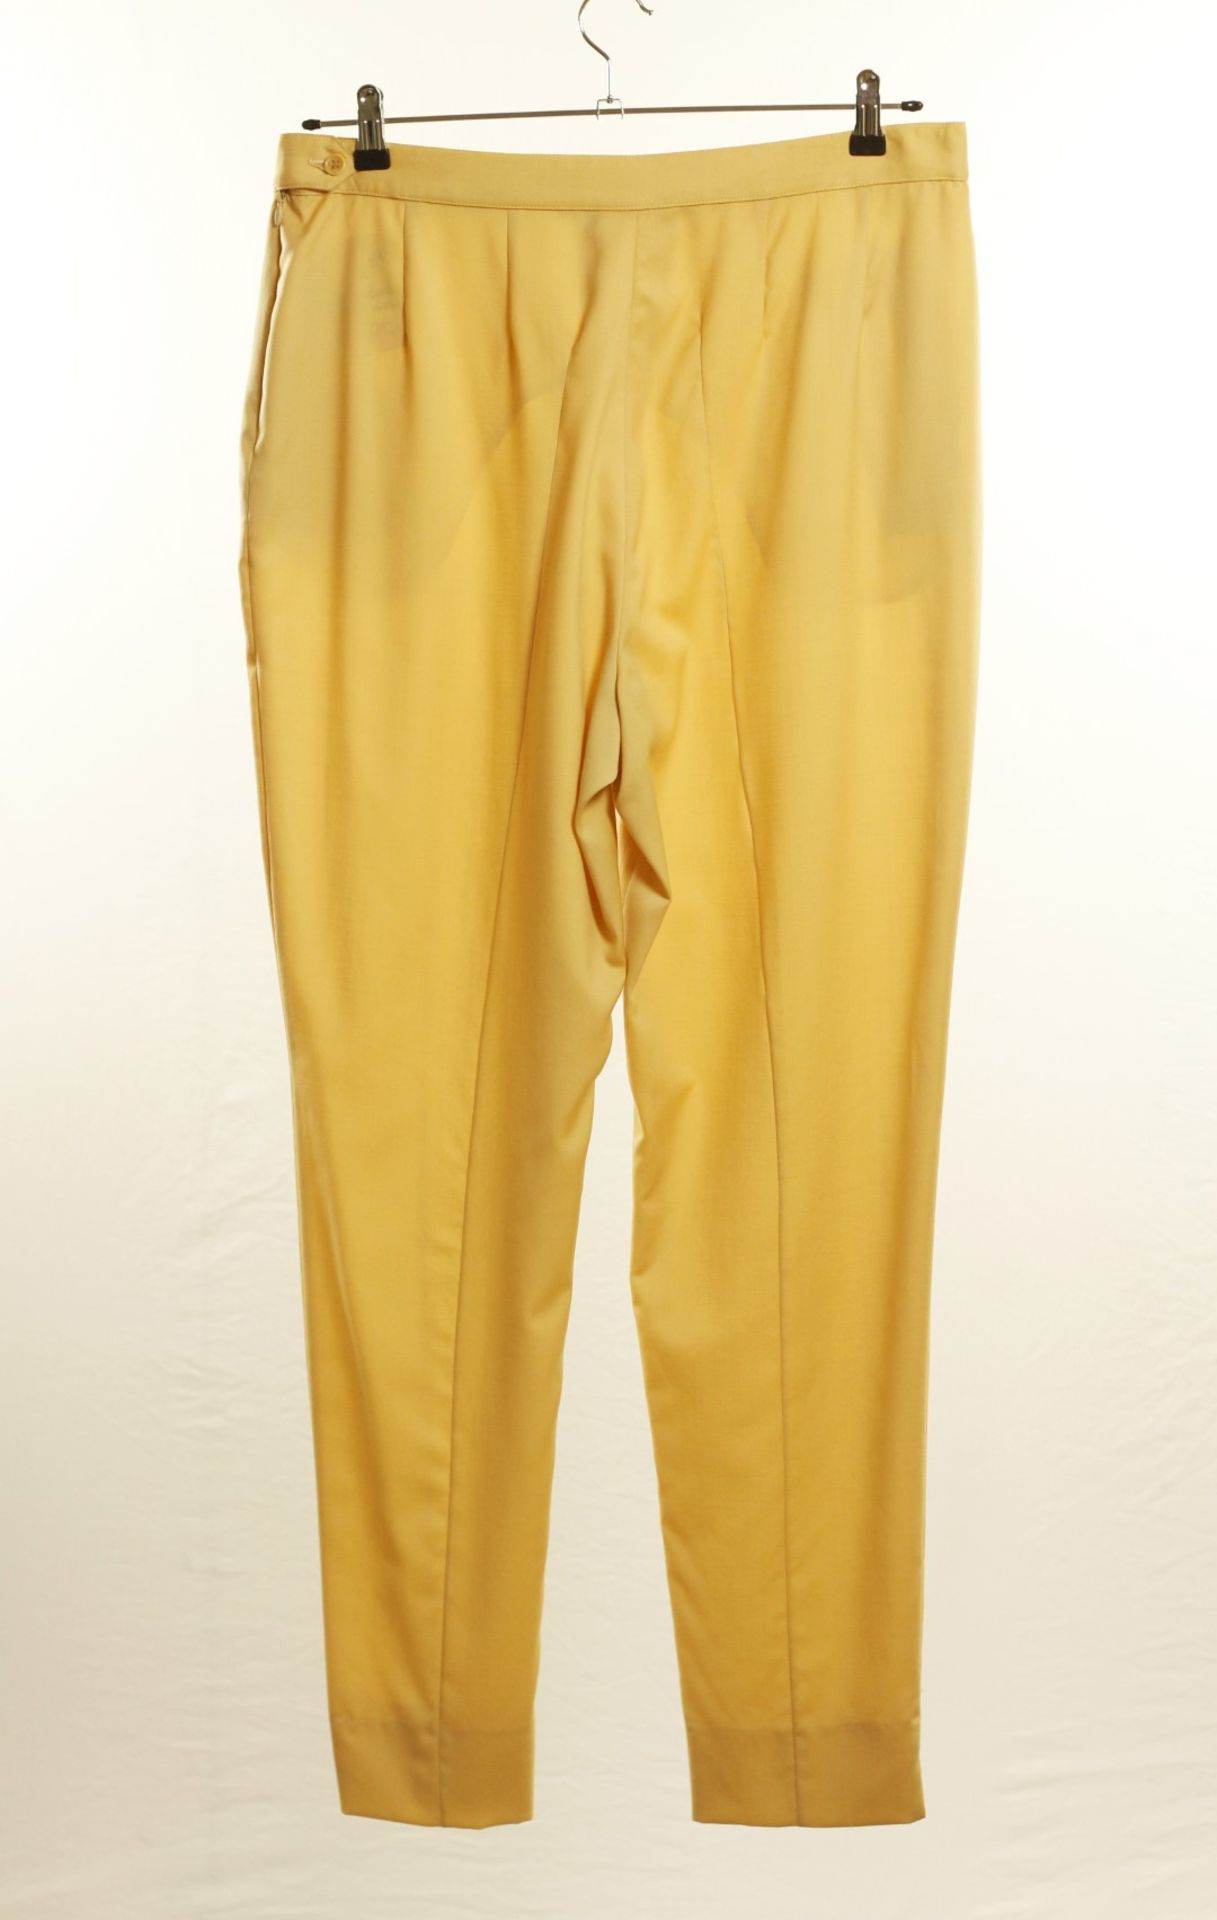 1 x Artico Cream Trousers - Size: 18 - Material: 100% Leather. Lining 50% viscose, 50% Acetate -